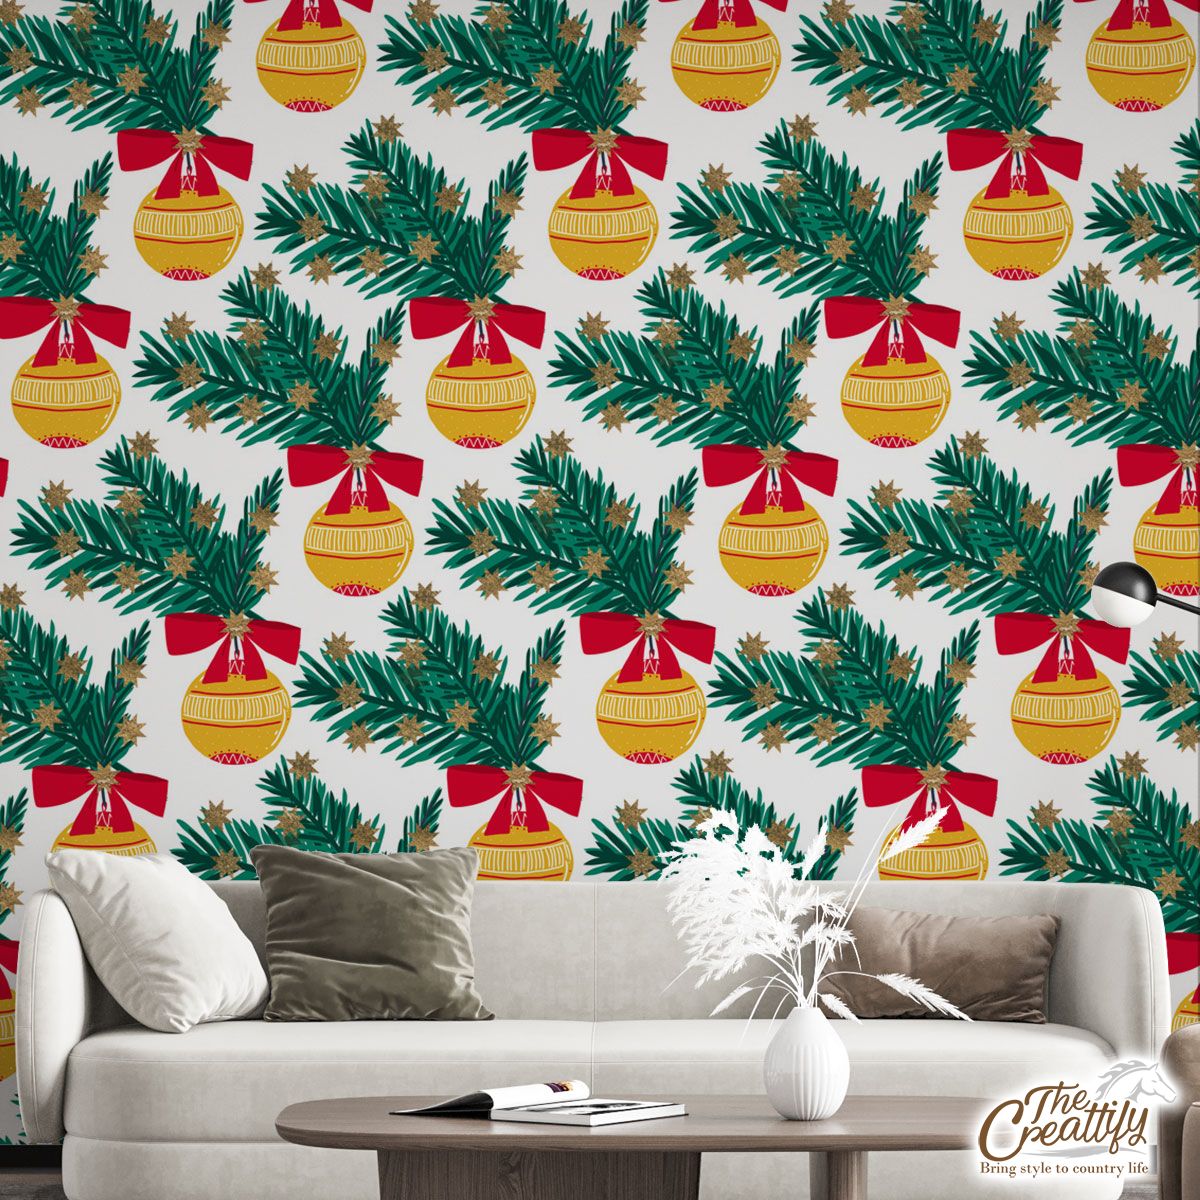 Christmas Balls With Pine Tree Branch Seamless Pattern Wall Mural